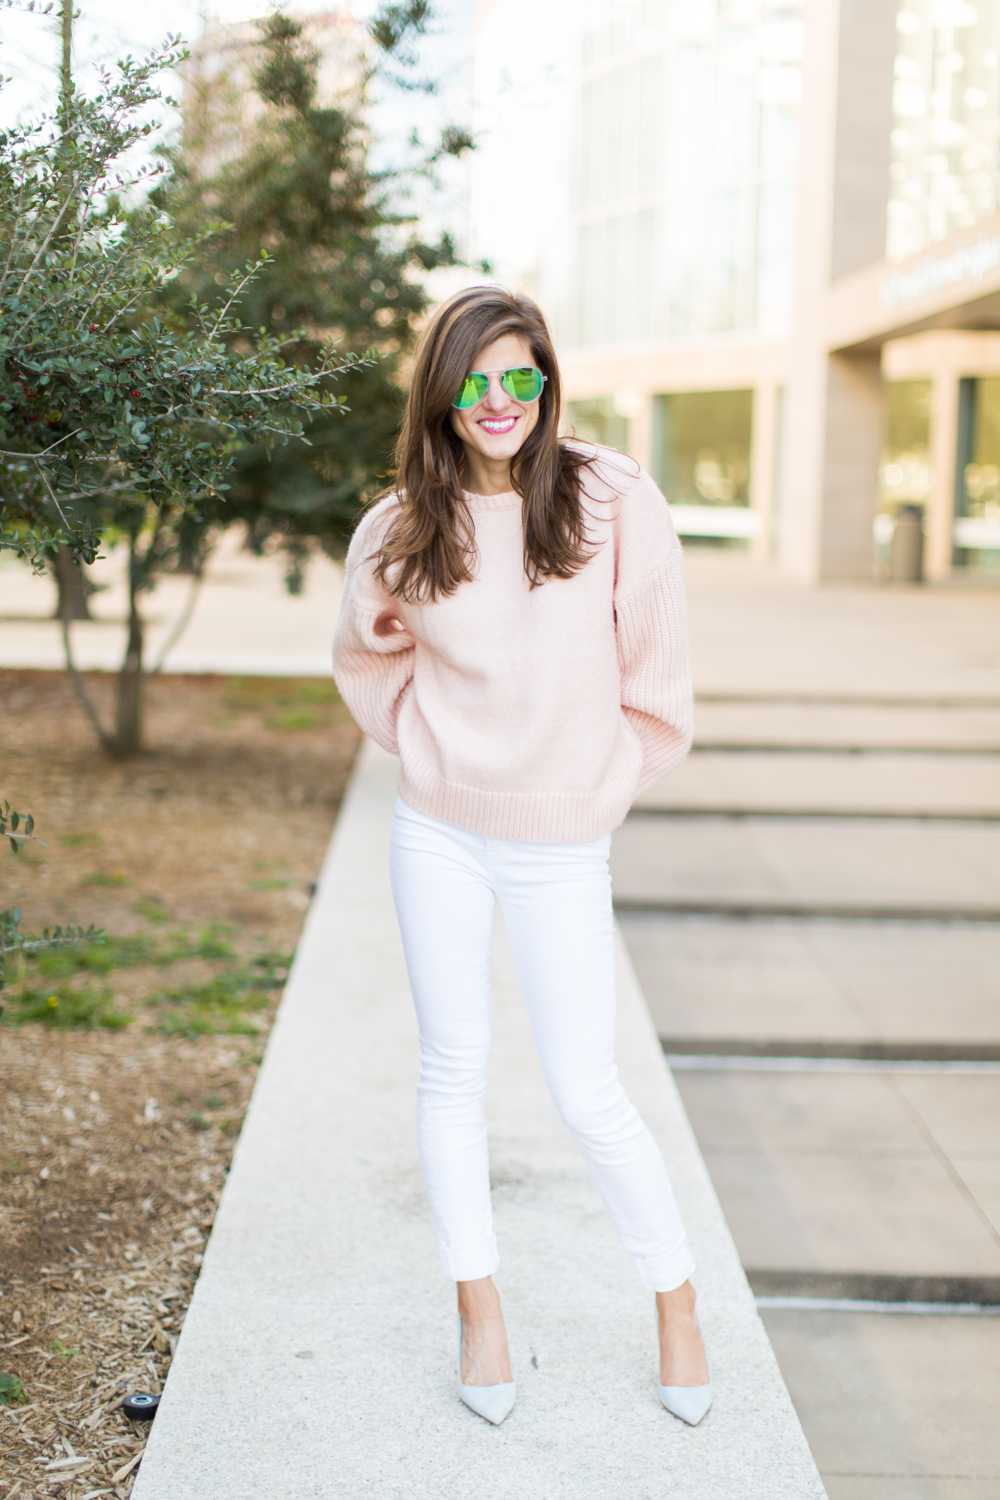 Yes, you can wear white after labor day! White jeans / pants for